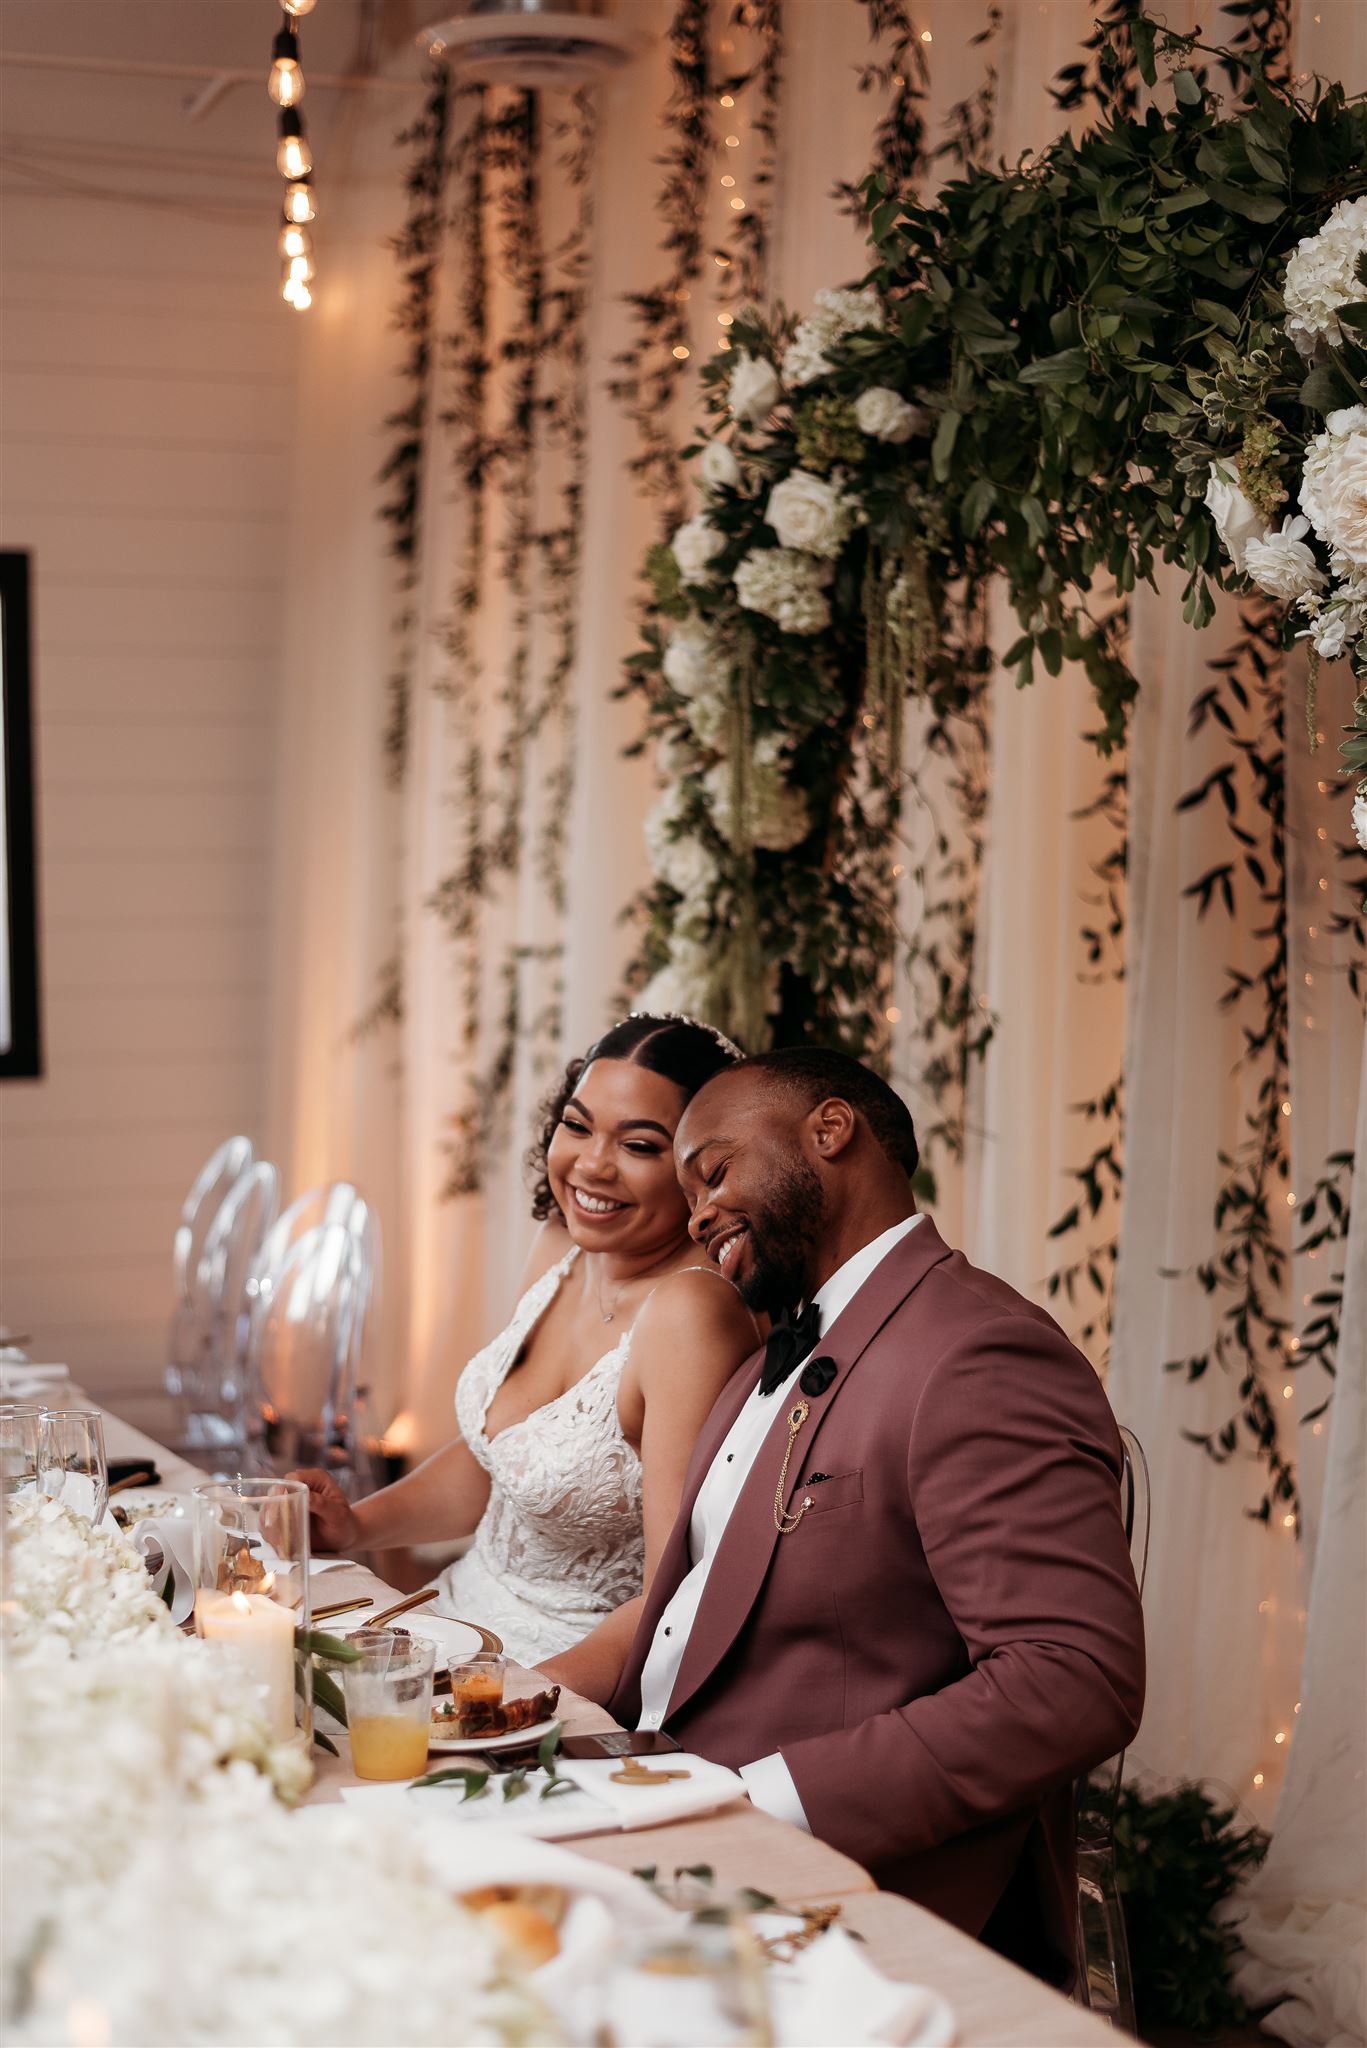 Bridal Bliss: Iman And Anthony's Wedding Was Filled With Lush Greenery And Lots Of Love